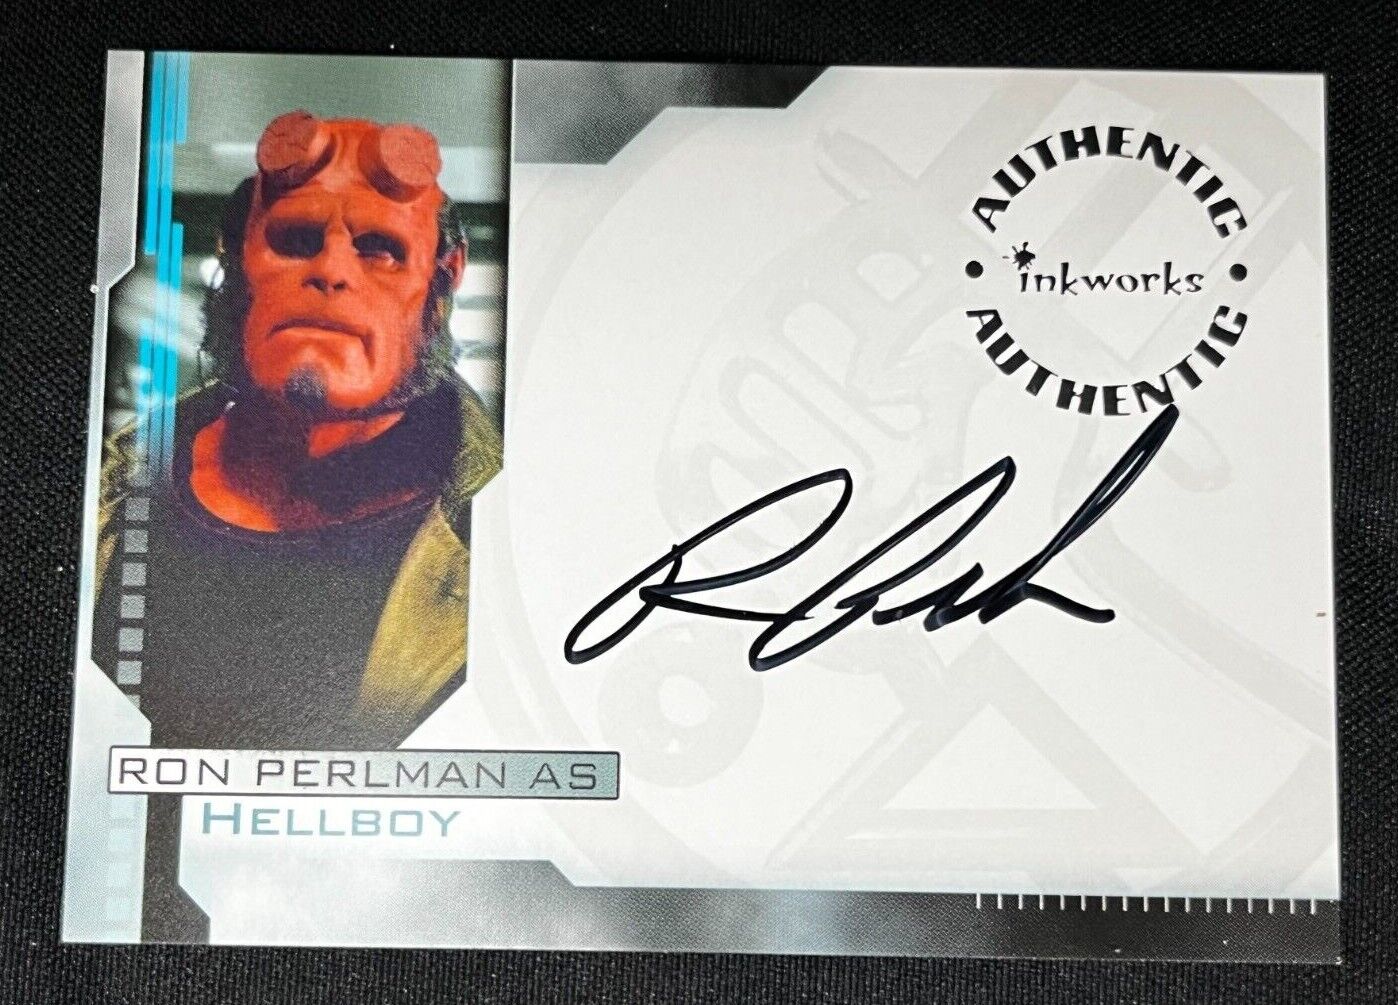 2008 INKWORKS MOVIE RON PERLMAN AS HELLBOY #A1 AUTOGRAPH CARD (AA)